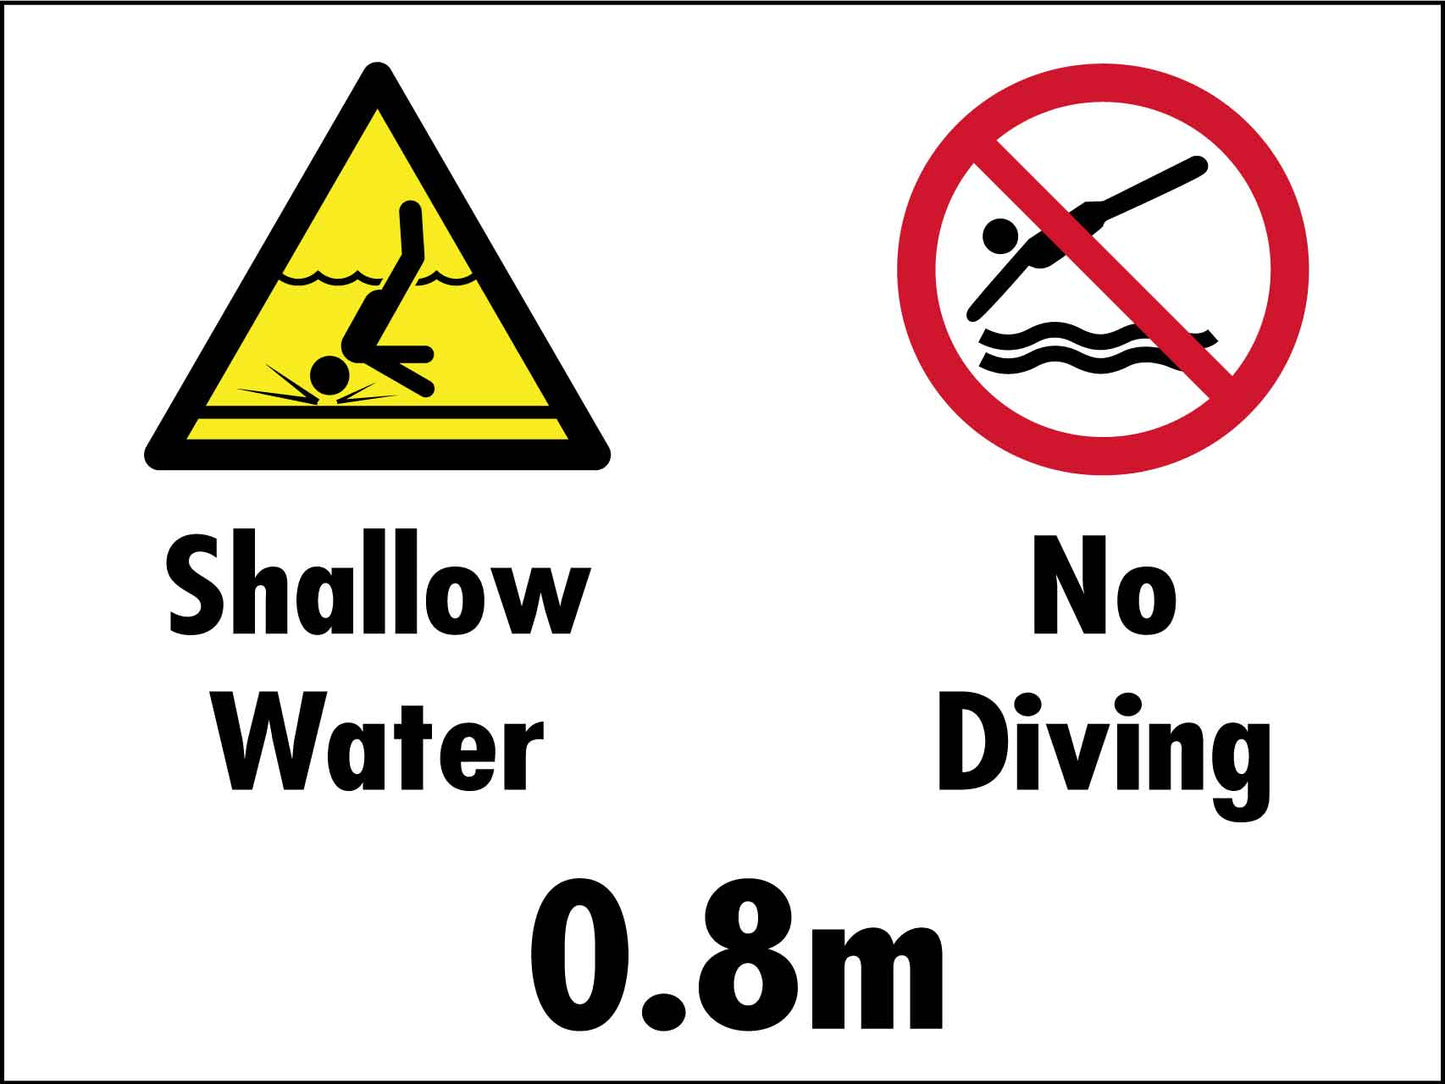 Shallow Water No Diving 0.8m Sign